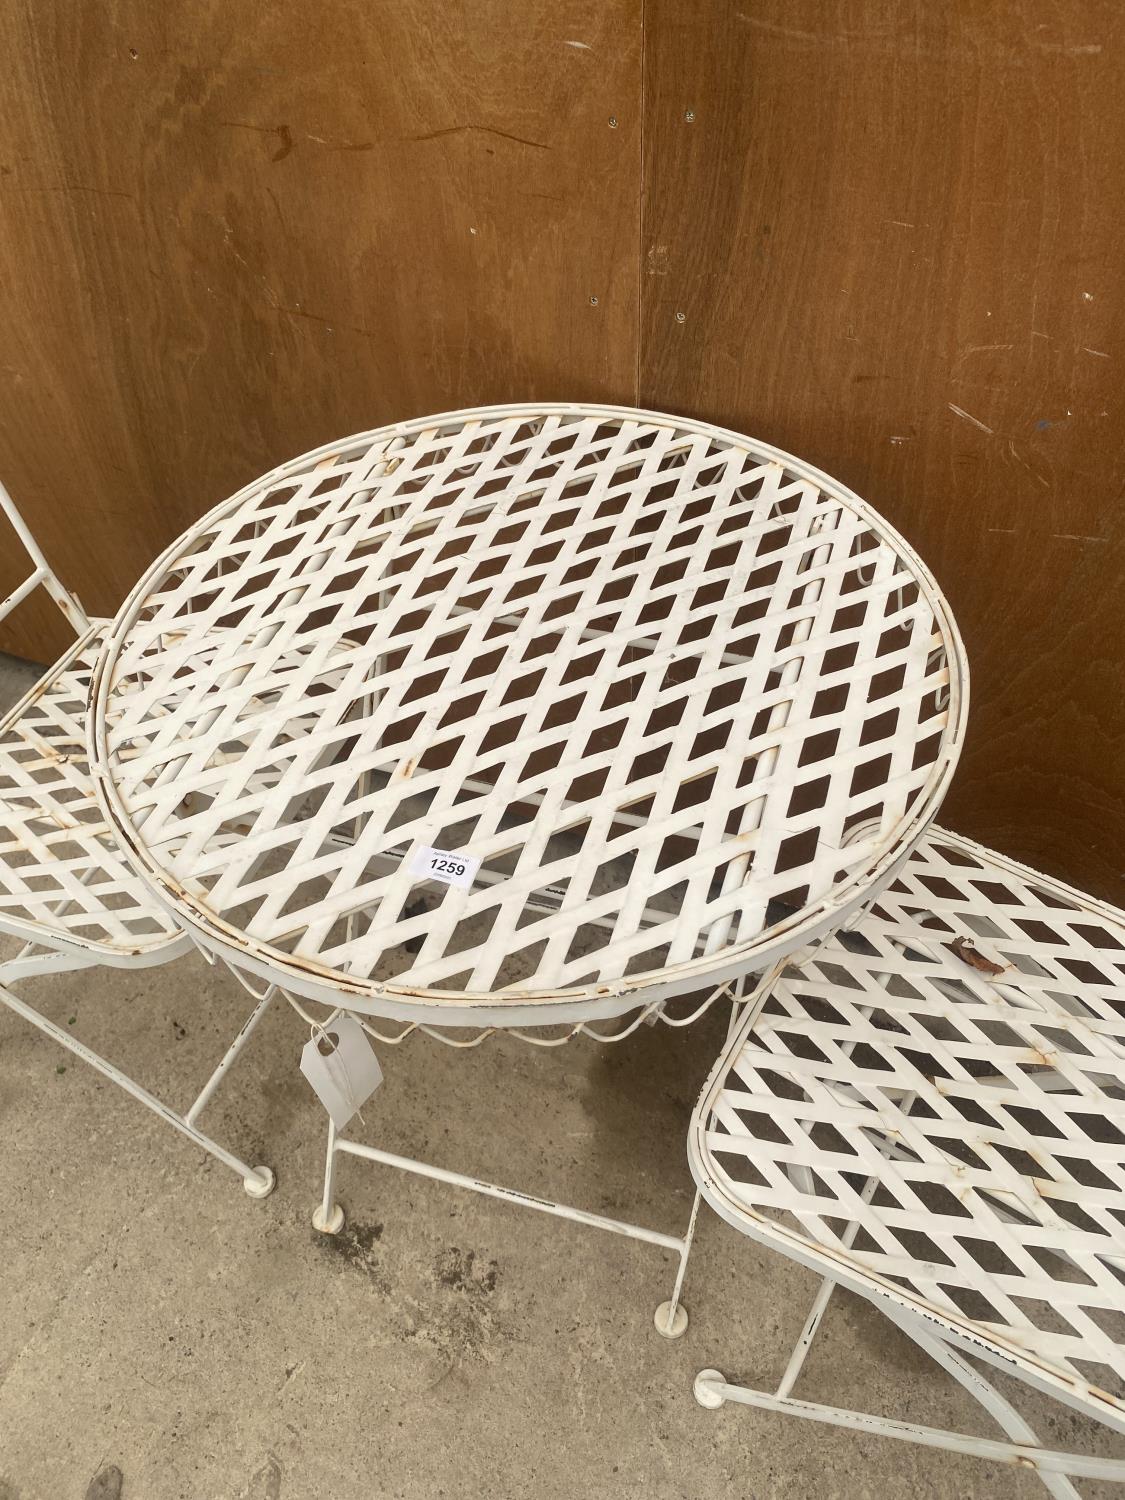 A DECORATIVE WROUGHT IRON BISTRO SET COMPRISING OF A ROUND TABLE AND TWO CHAIRS - Image 2 of 5